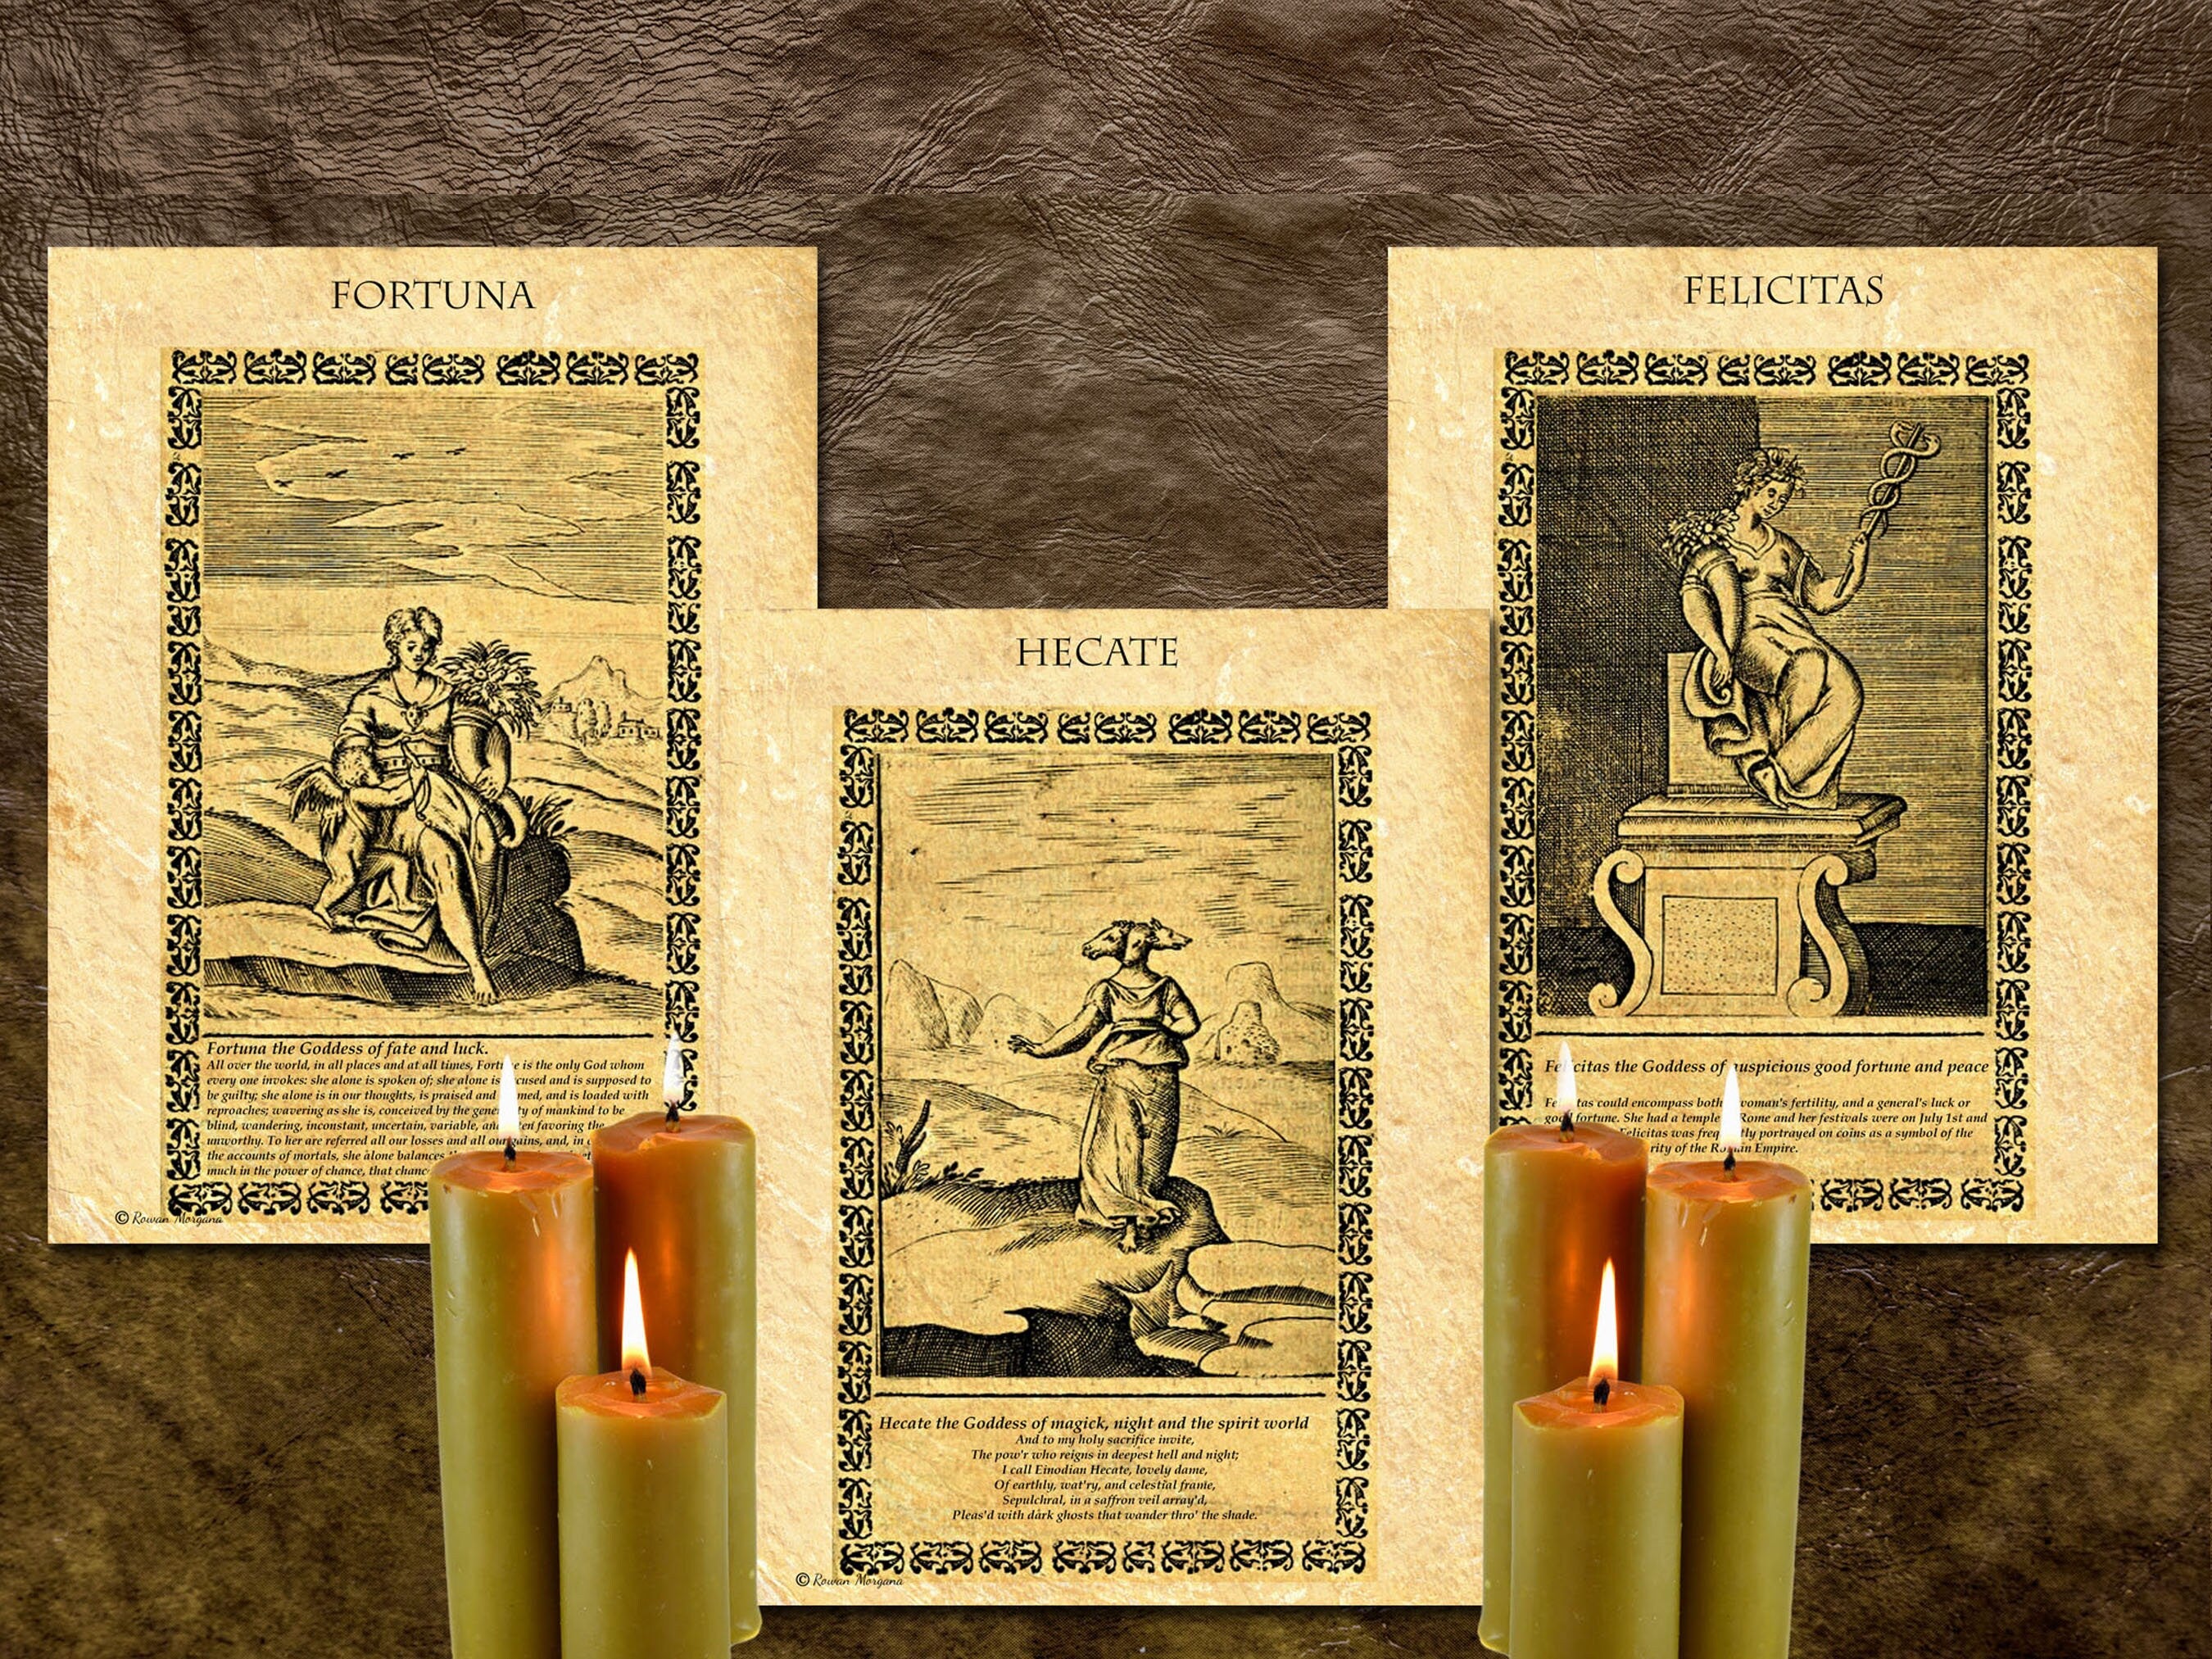 Fortuna, Hecate, and Felicity’s pages with images of the Gods and text describing them.